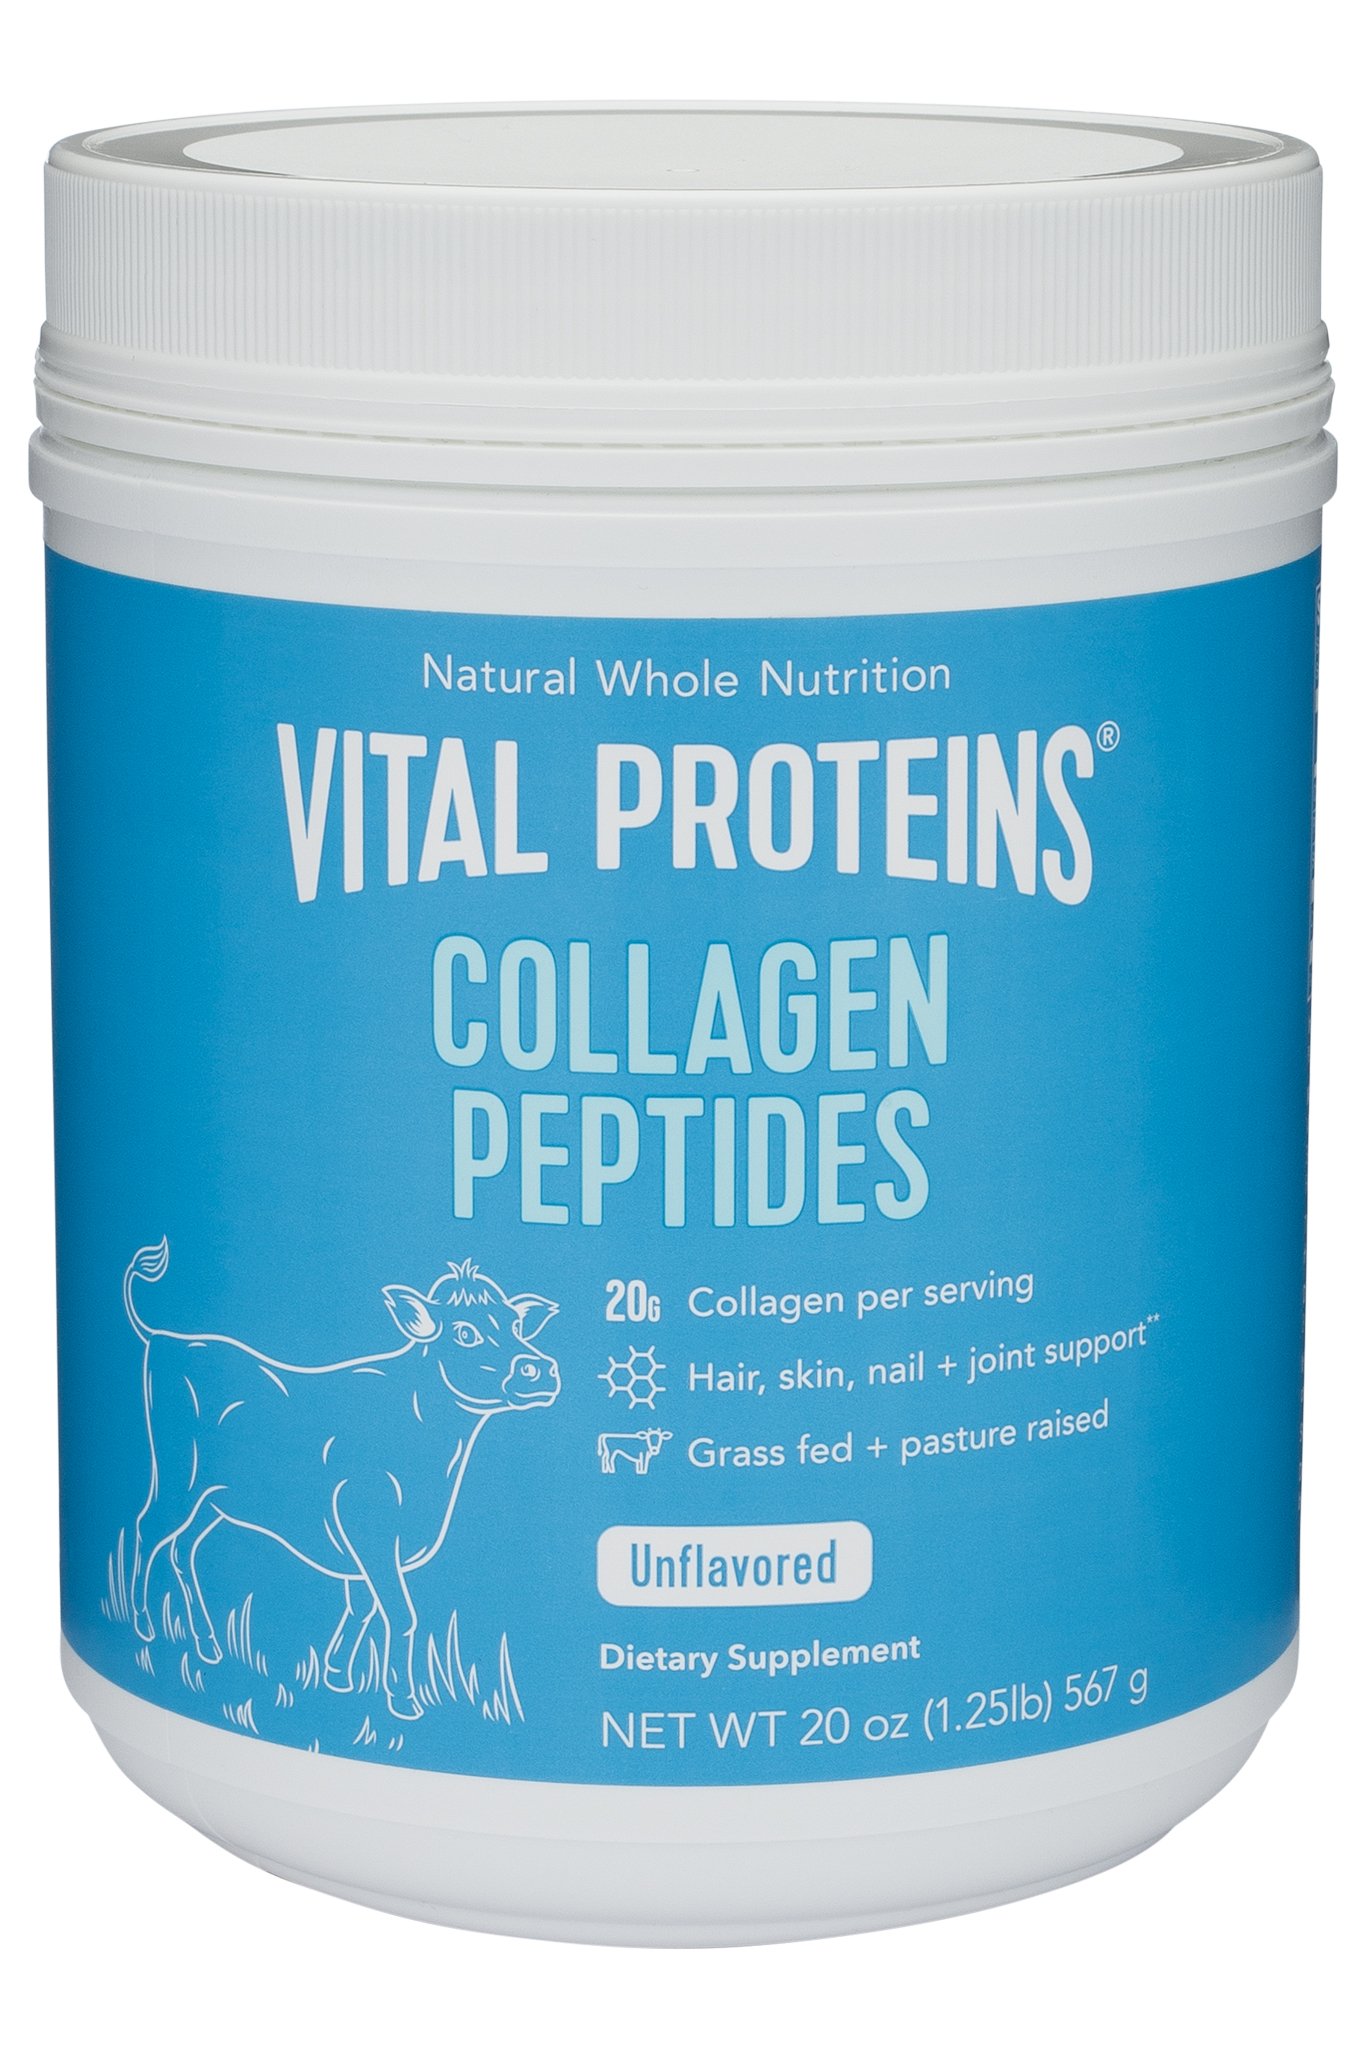 vital proteins collage peptides review